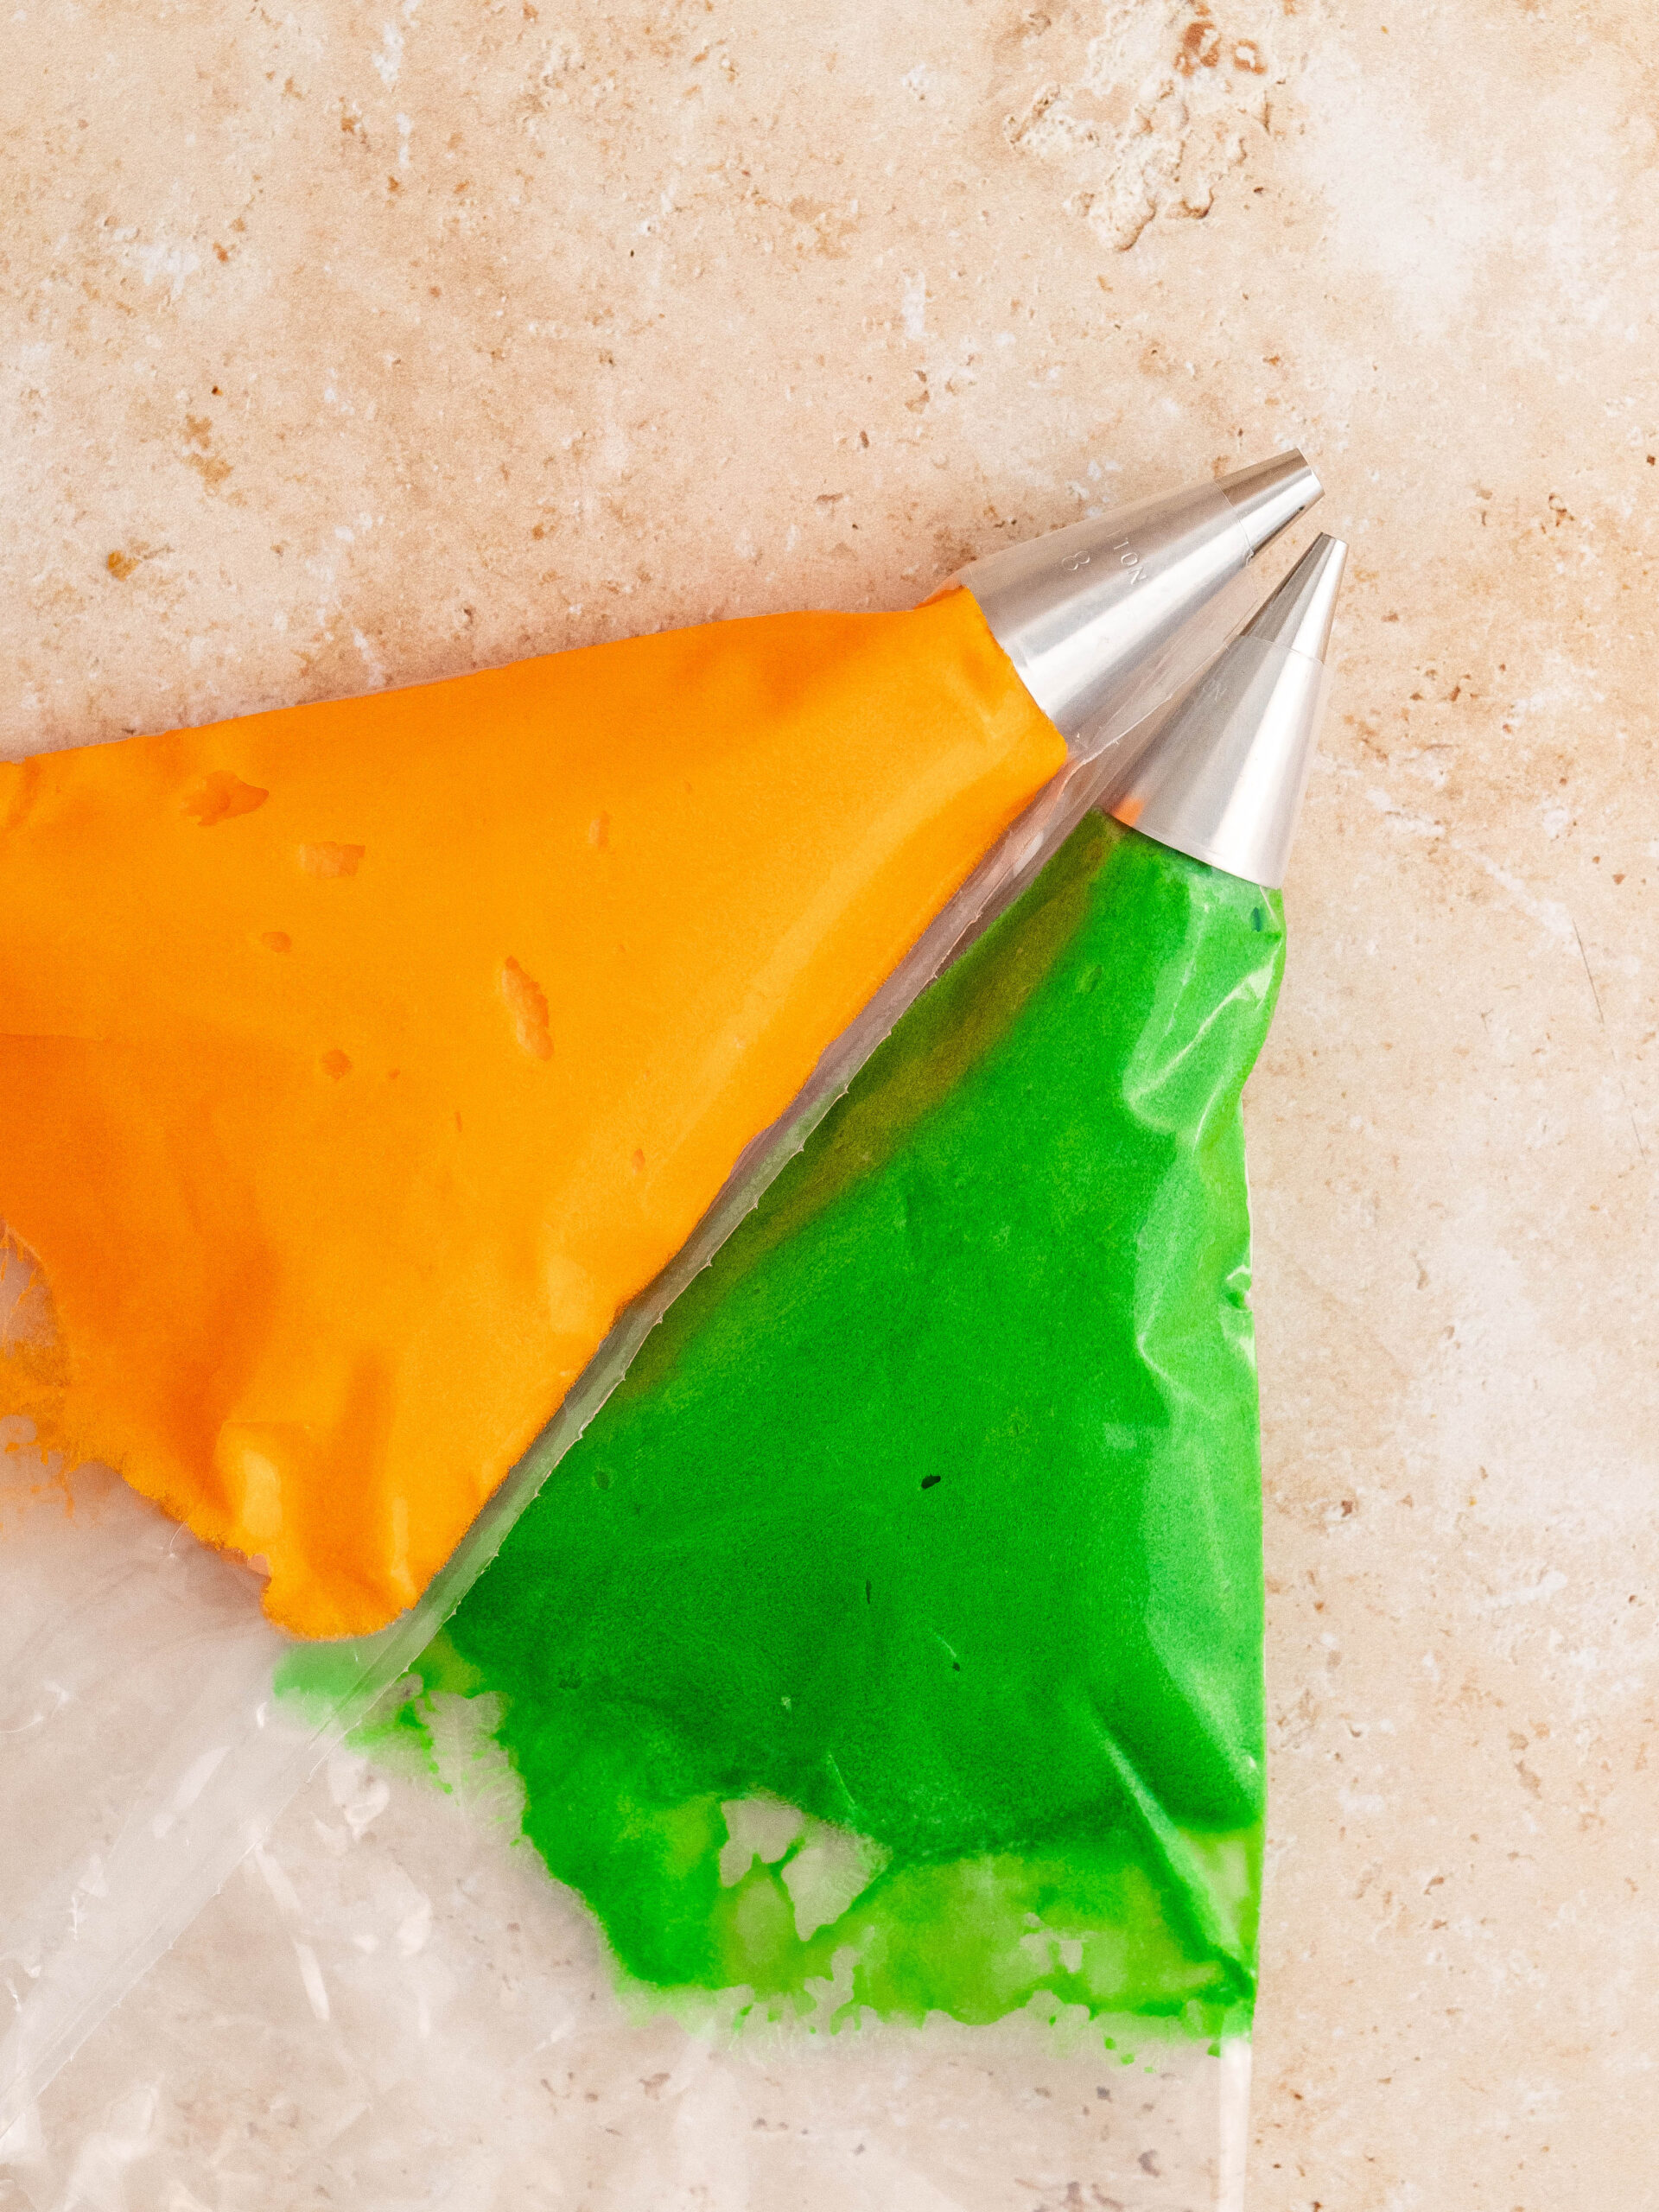 Cream cheese frosting colored orange and green, and placed in a piping bag.